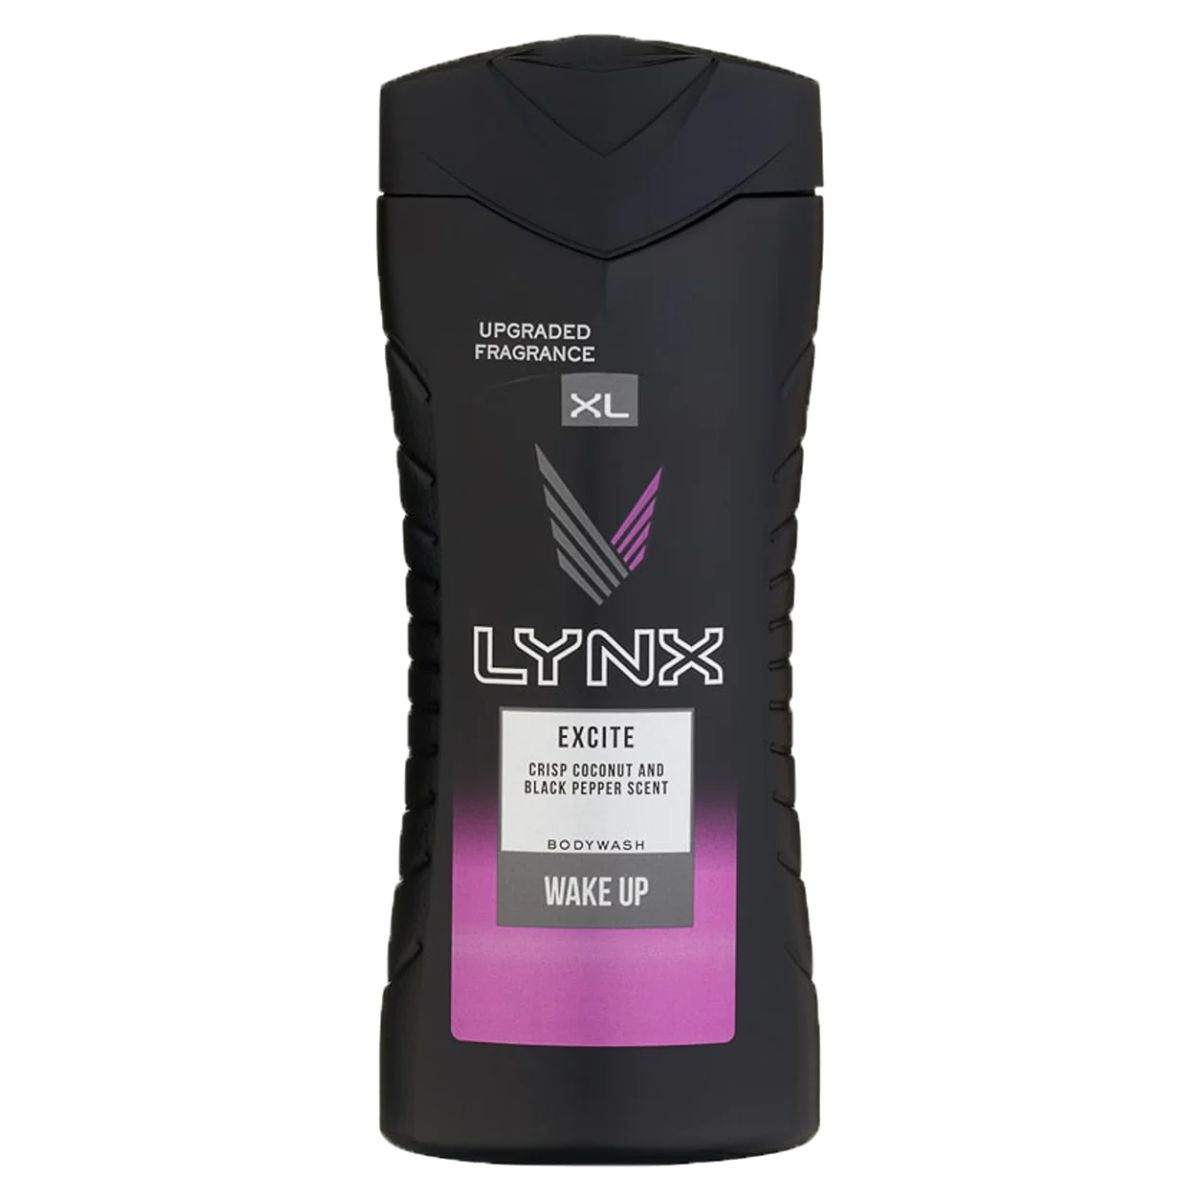 Bottle of Lynx - Shower Gel Excite - 225ml with crisp coconut and black pepper scent.